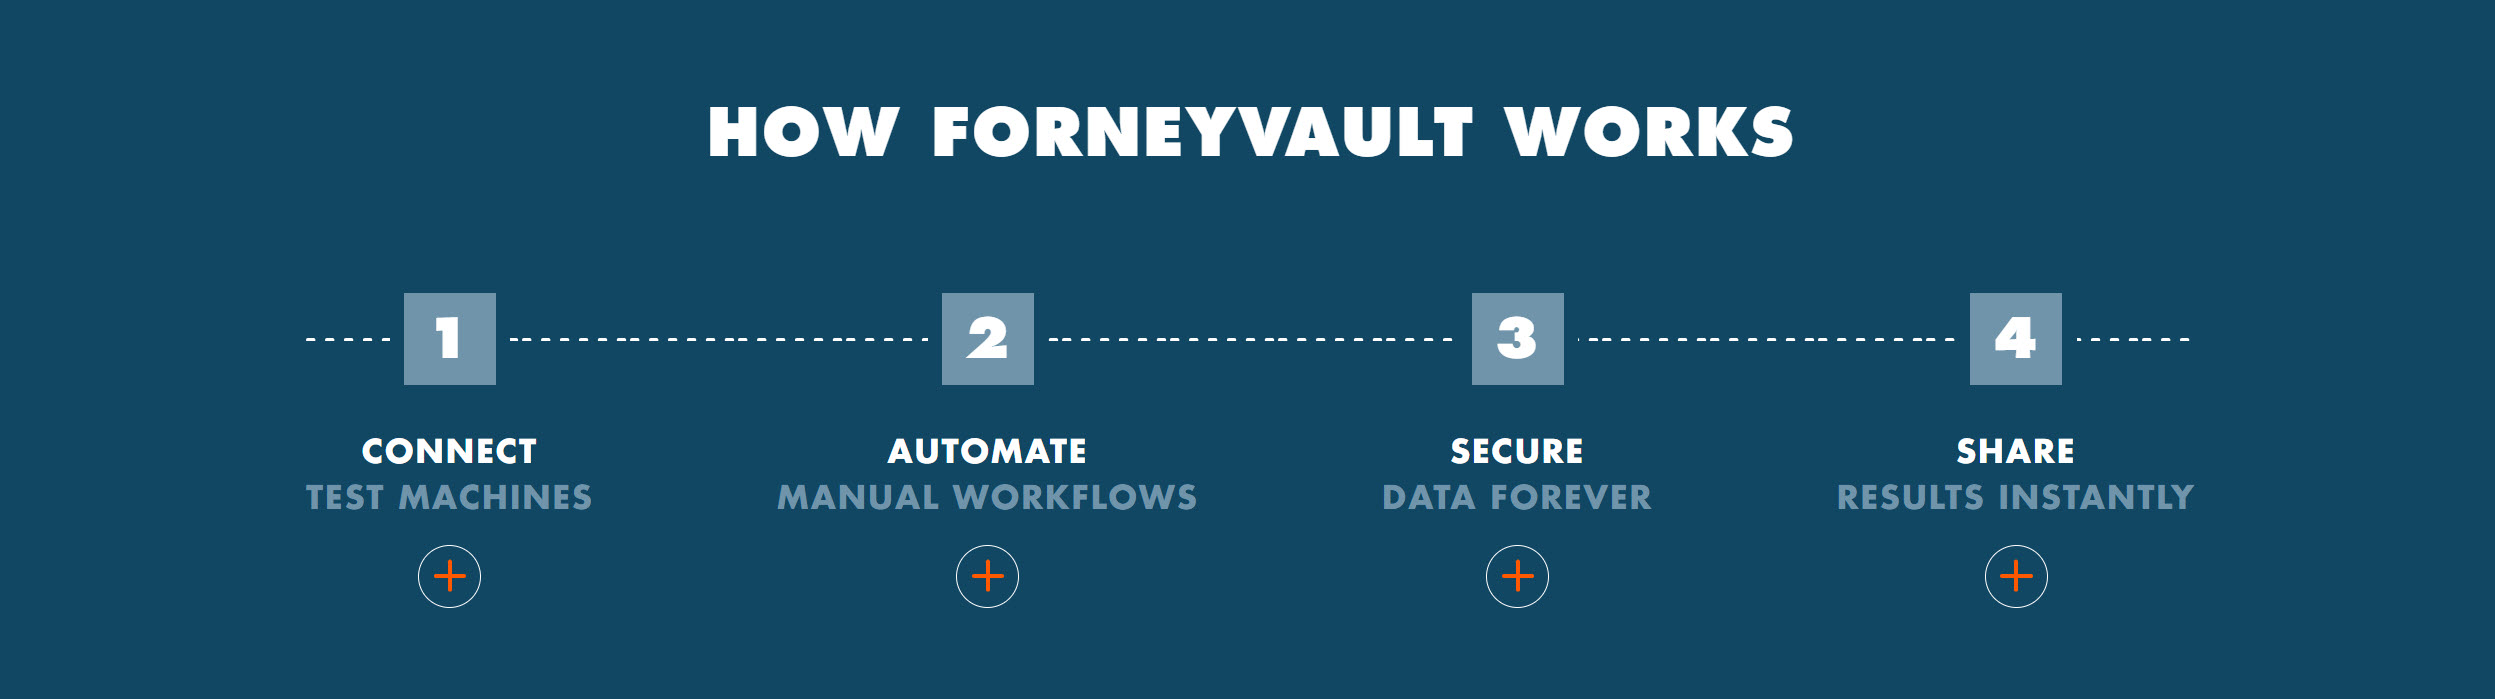 How ForneyVault Works 